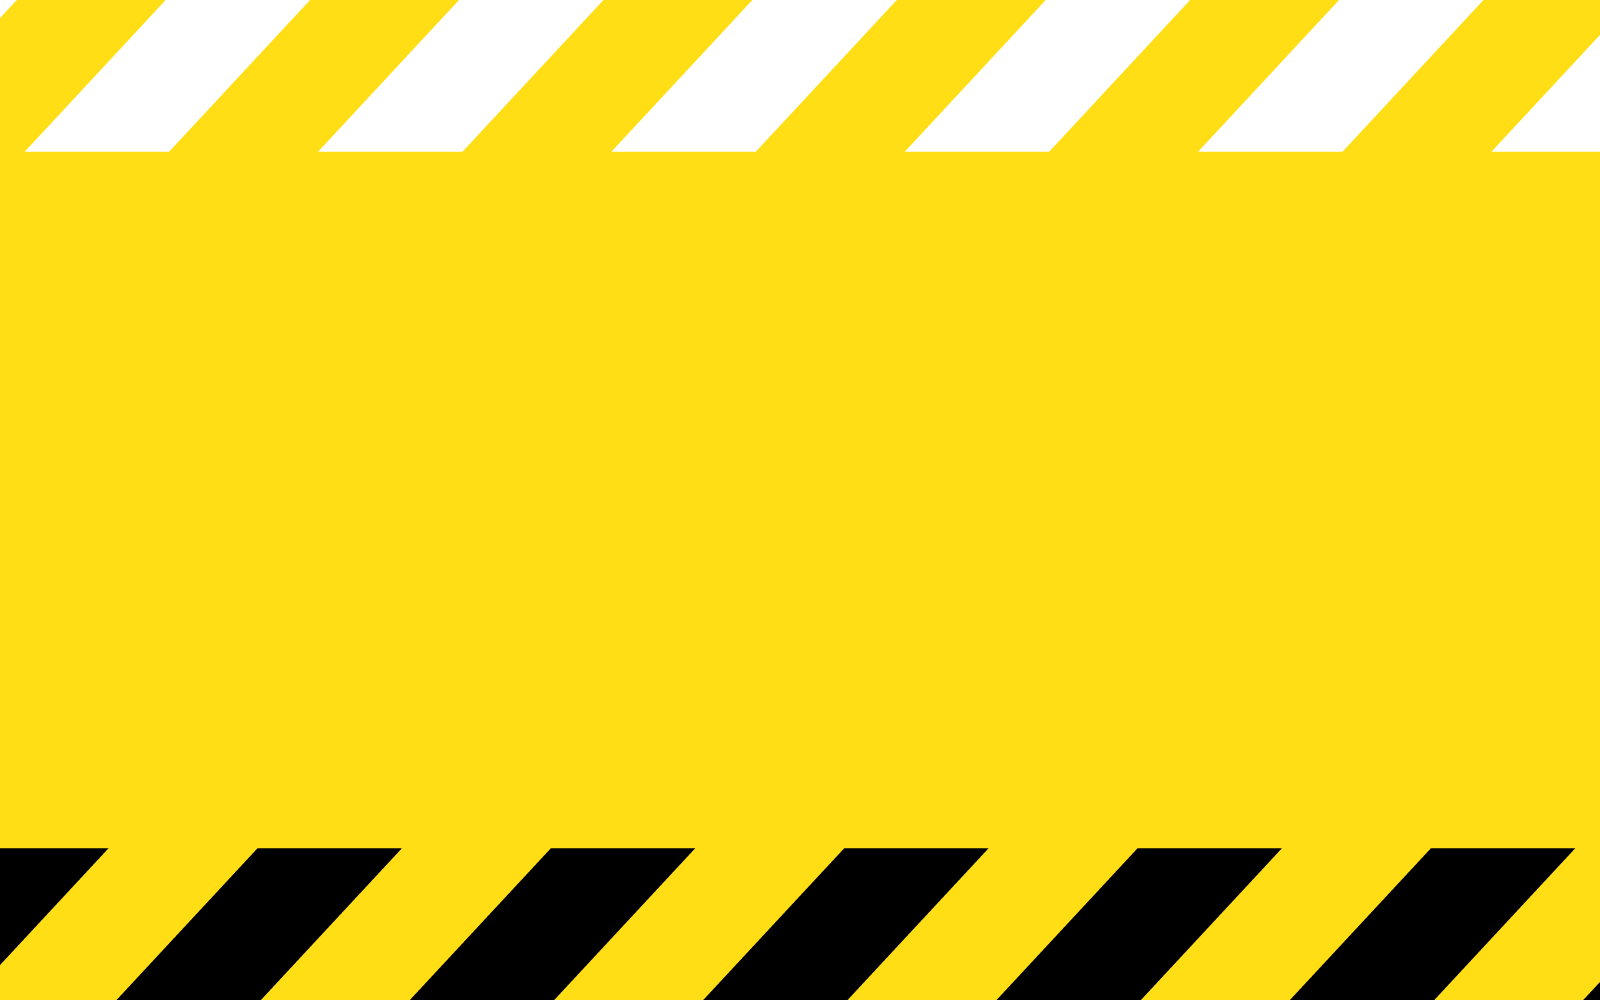 Black and yellow safety line background vector